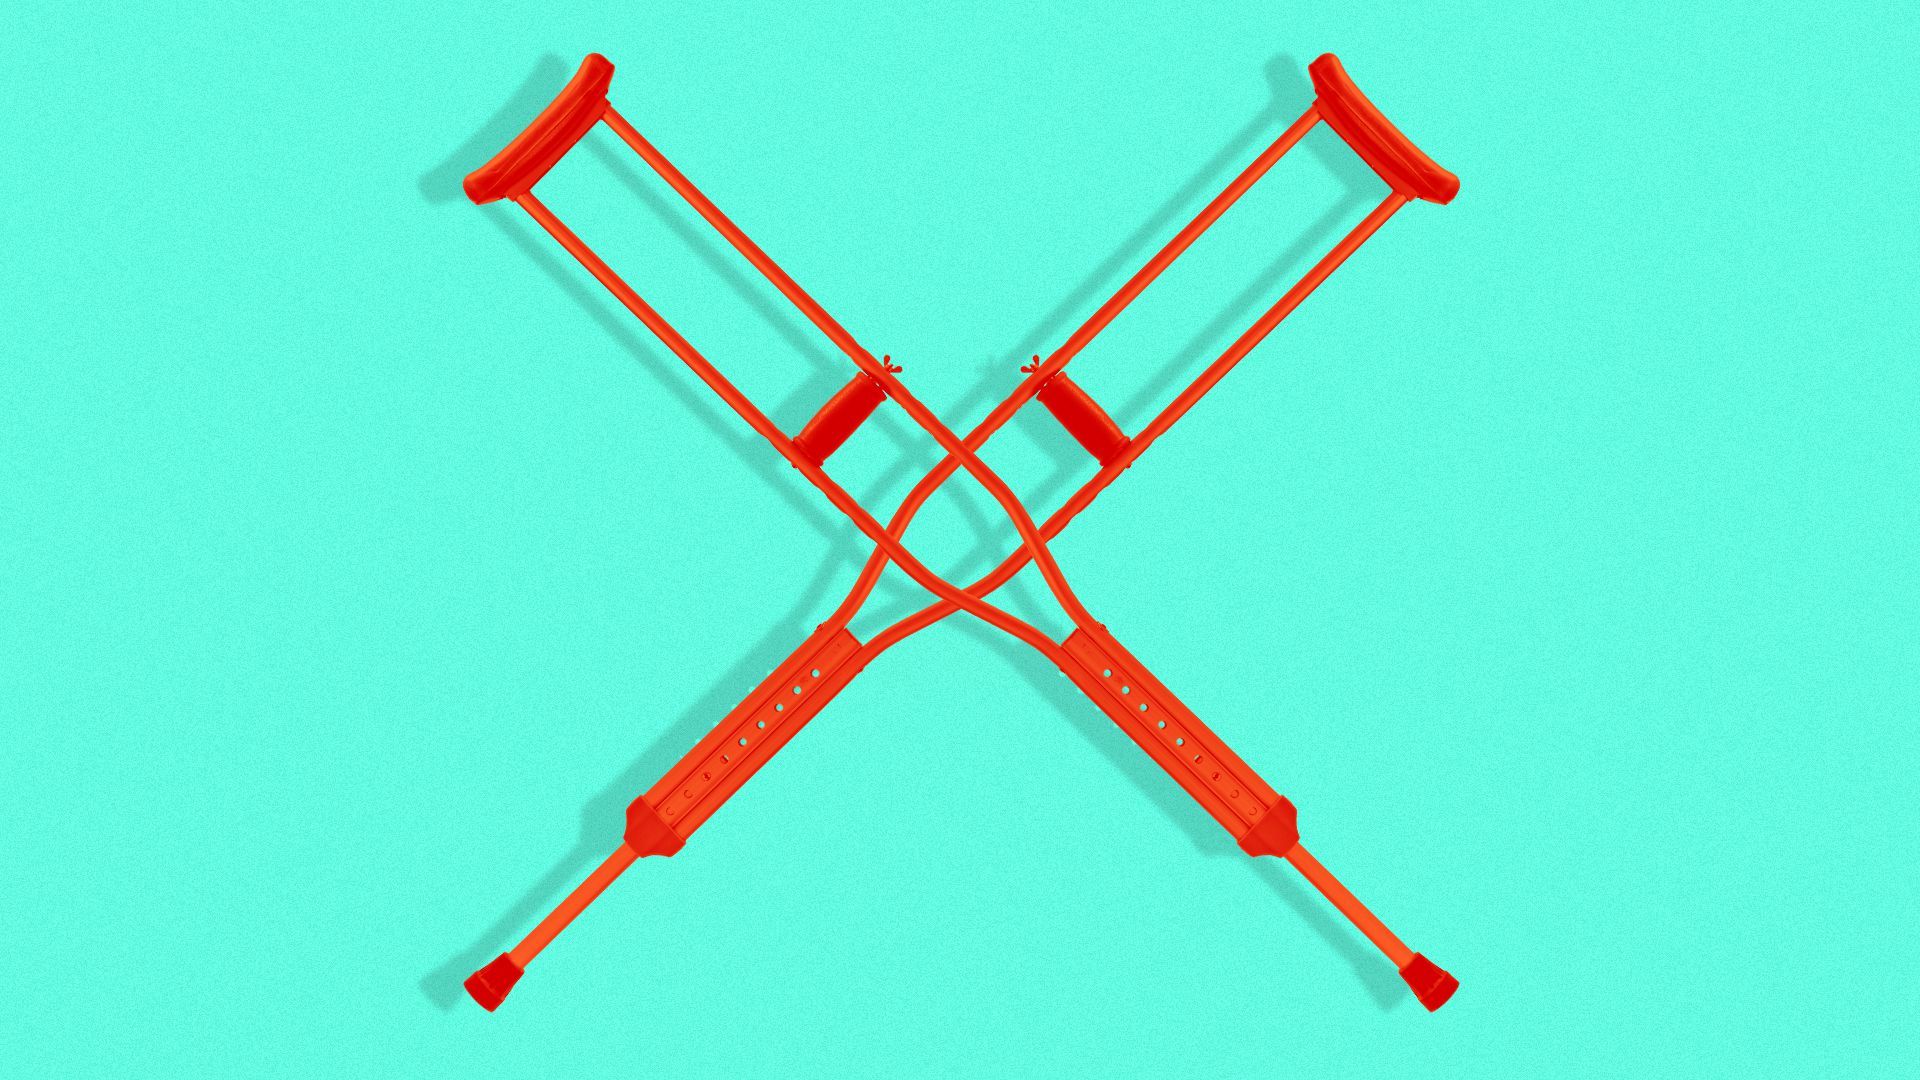 Illustration of red crutches in the shape of an x